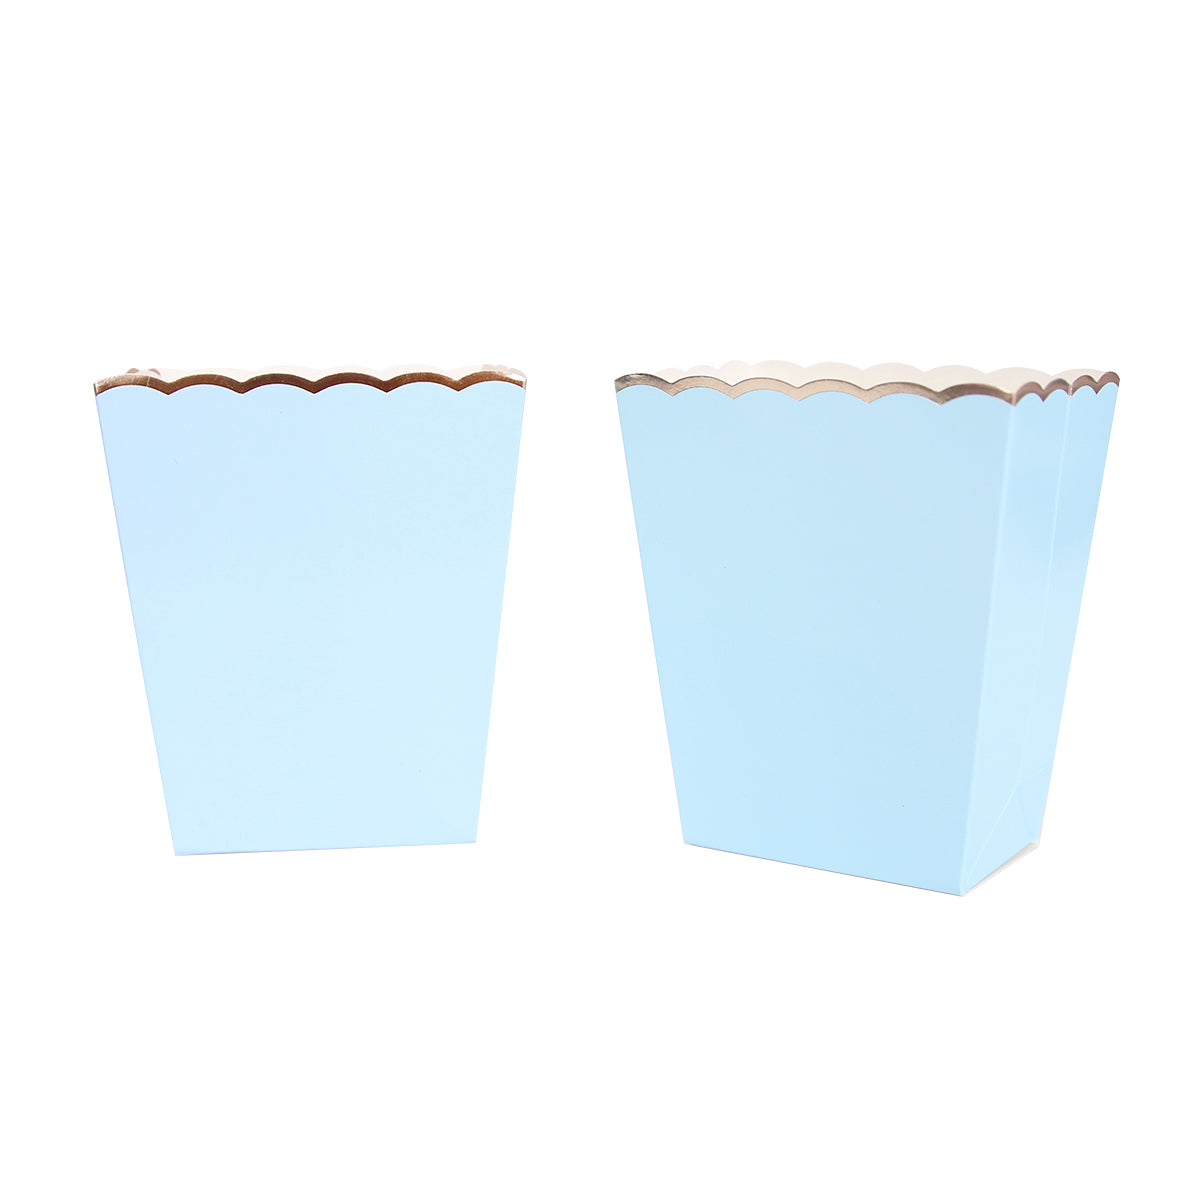 Favour Box Blue - 6 pack - Dollars and Sense